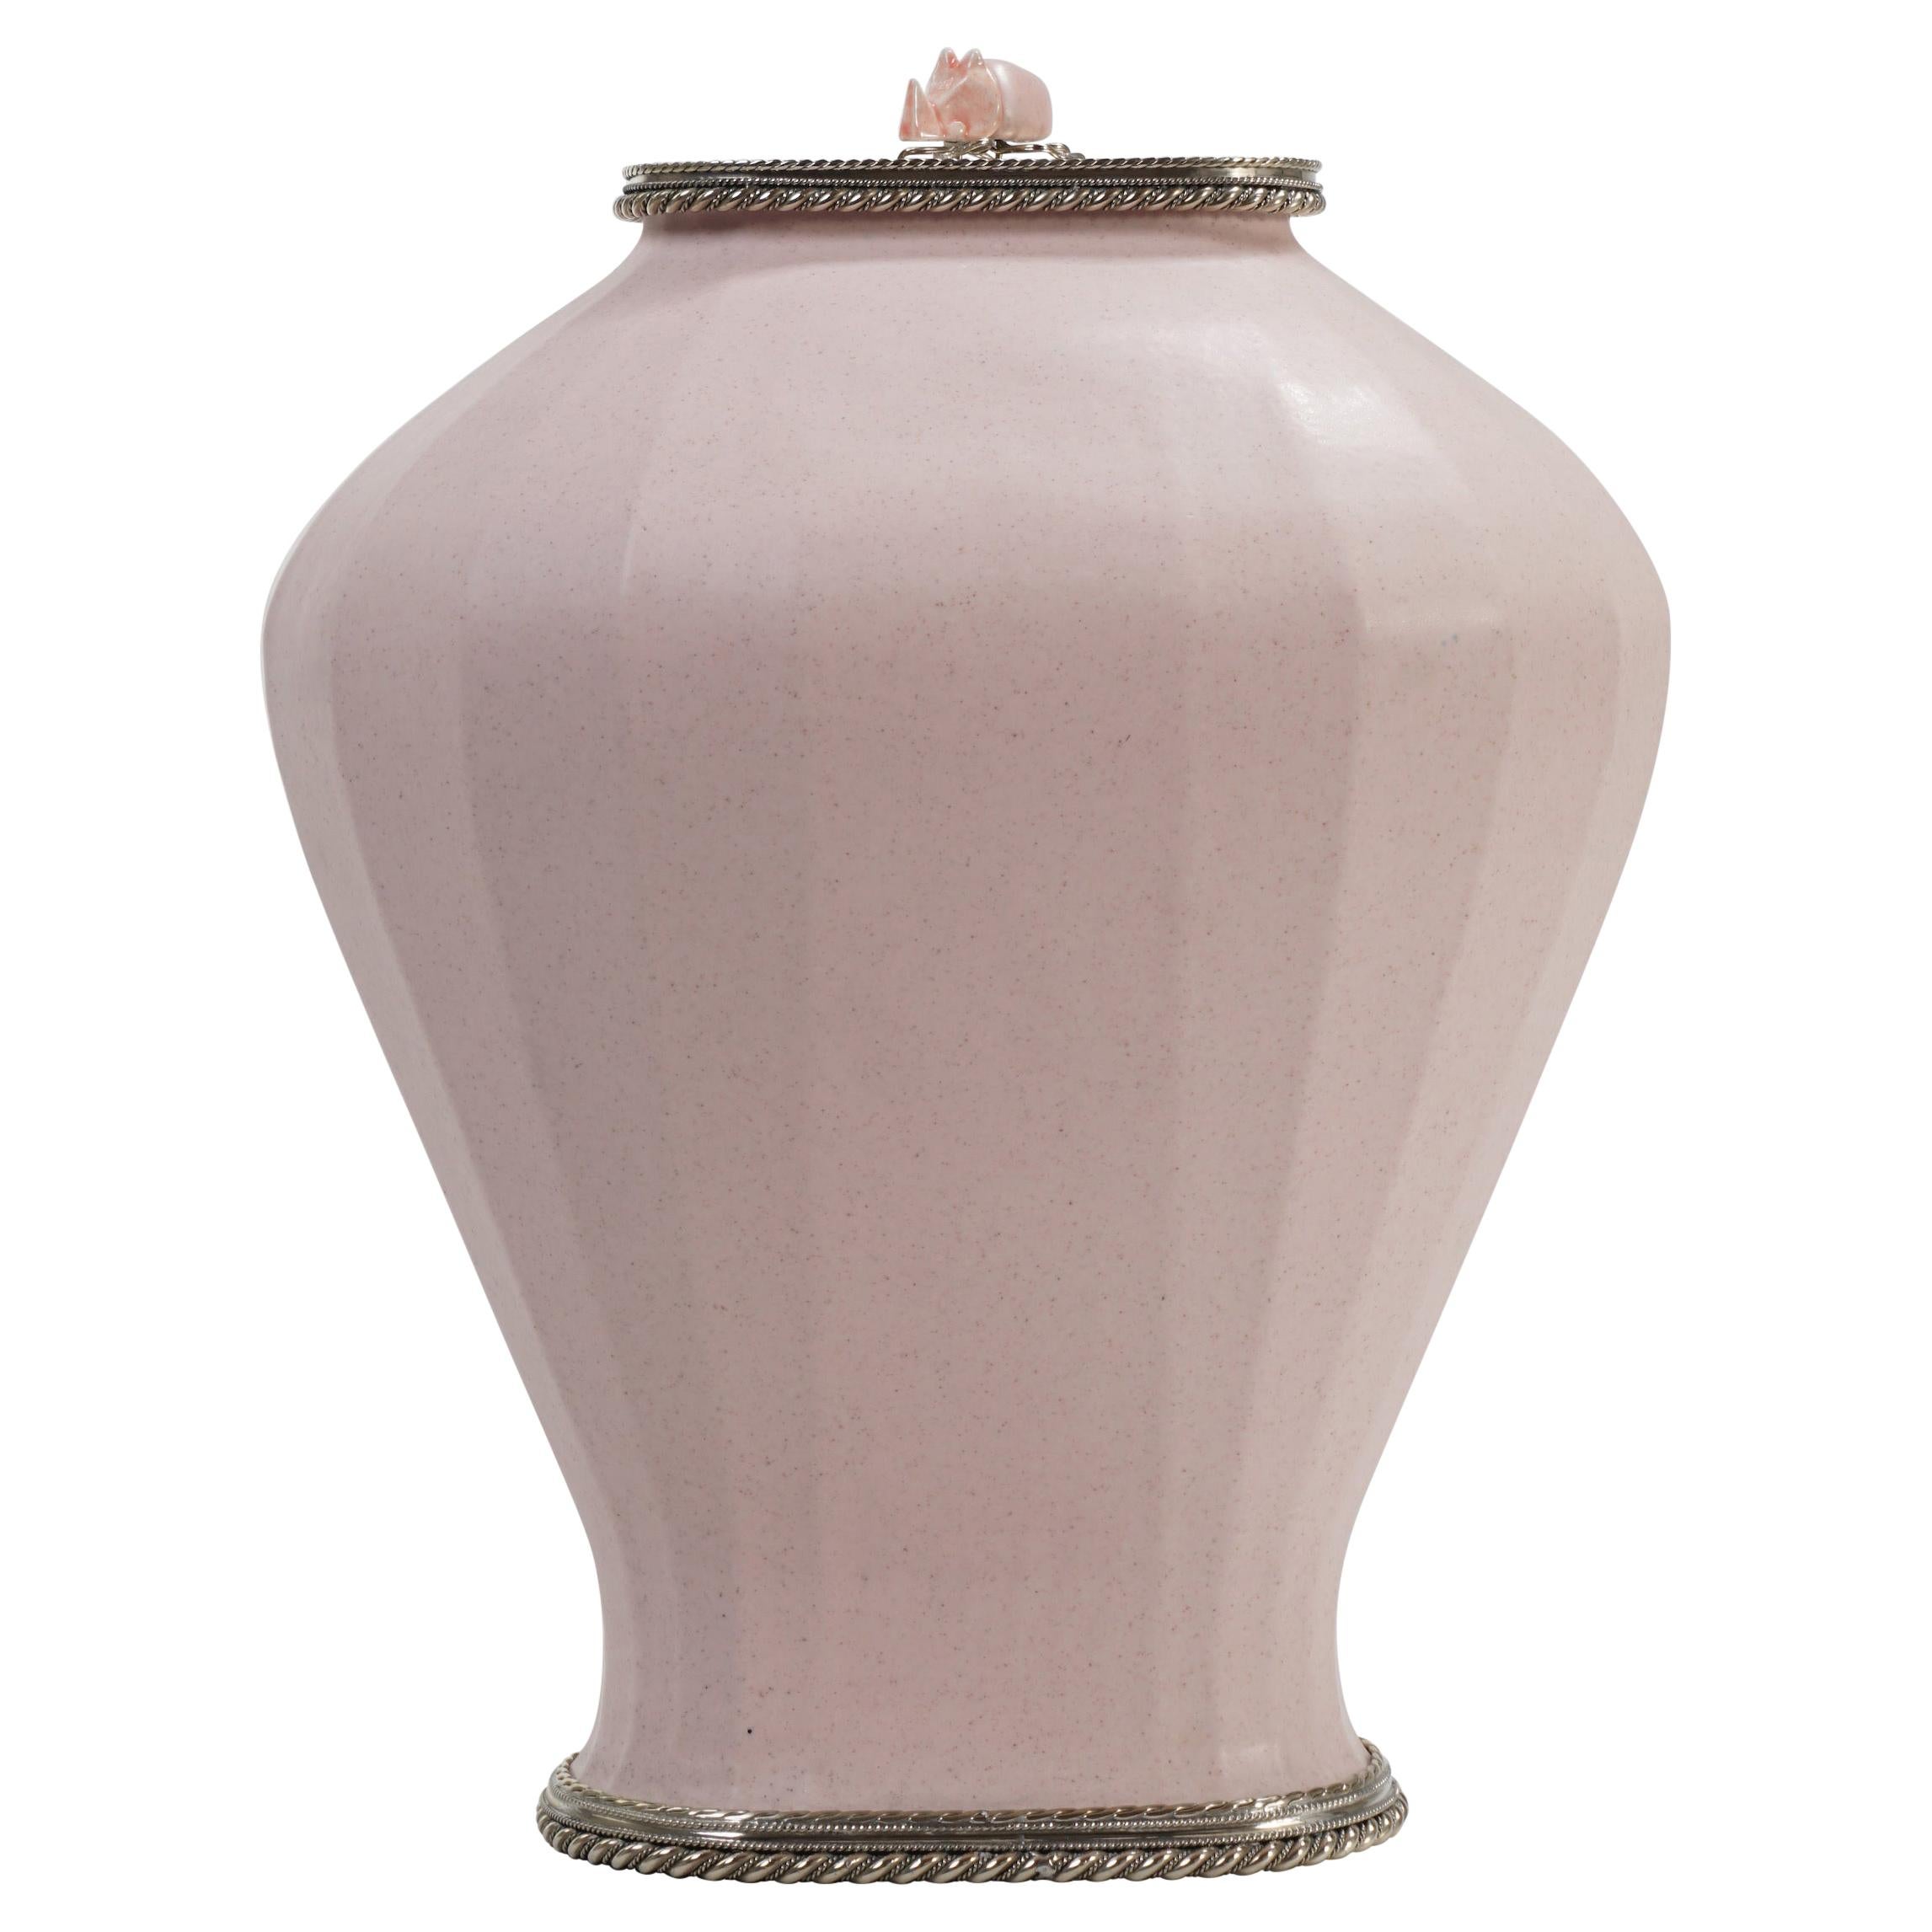 Pink Ceramic Base by Estudio Guerrero Made with Glazed Ceramic and White Metal